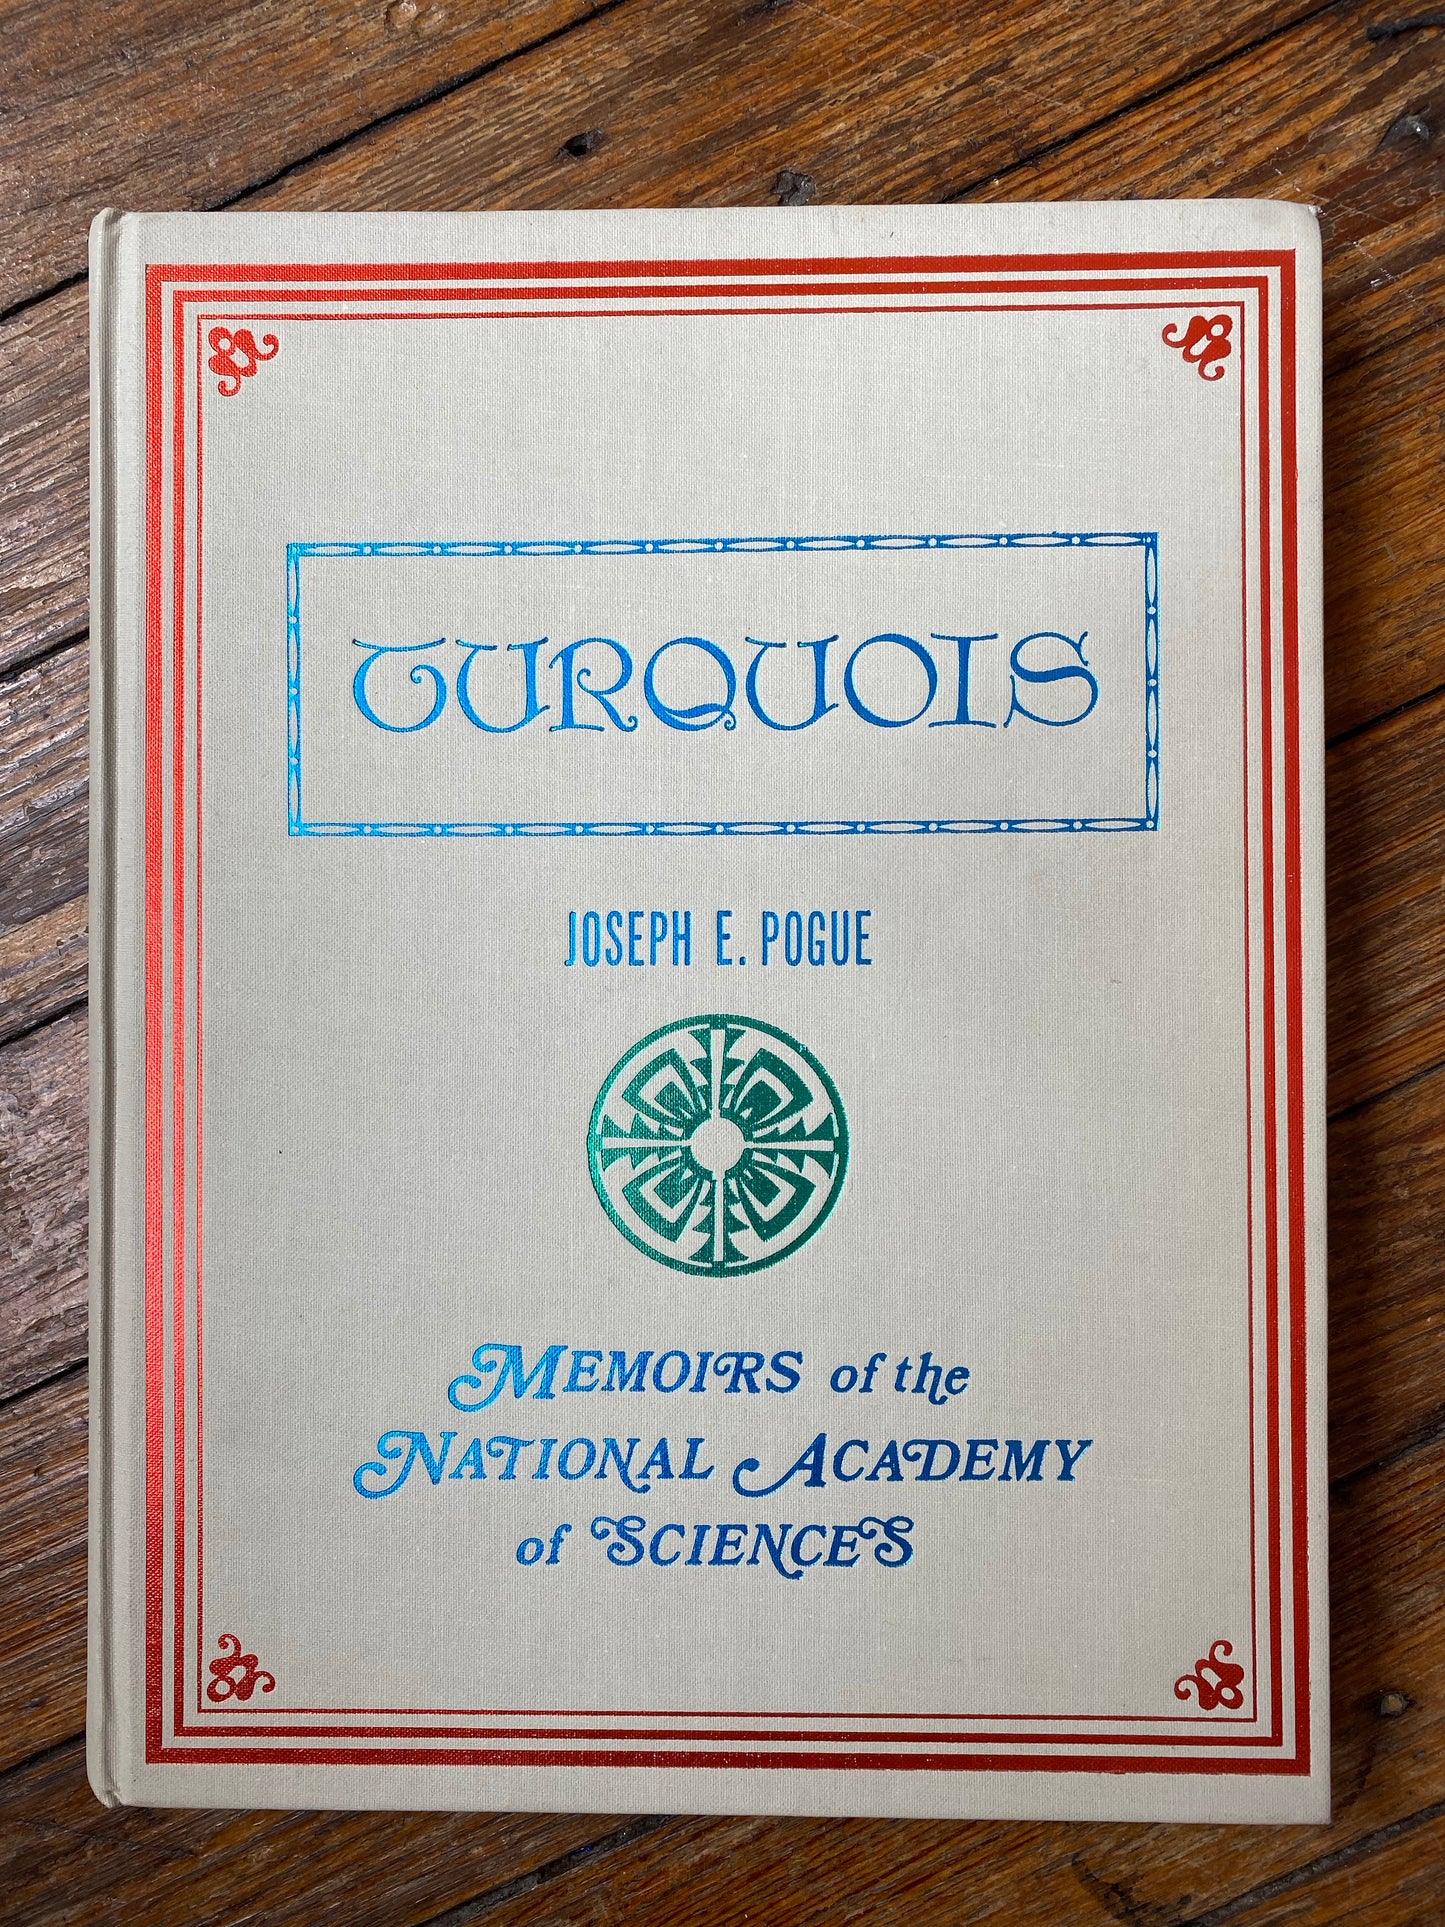 1973 Turquoise by Joseph E. Pogue - Memoirs of the National Academy of Sciences